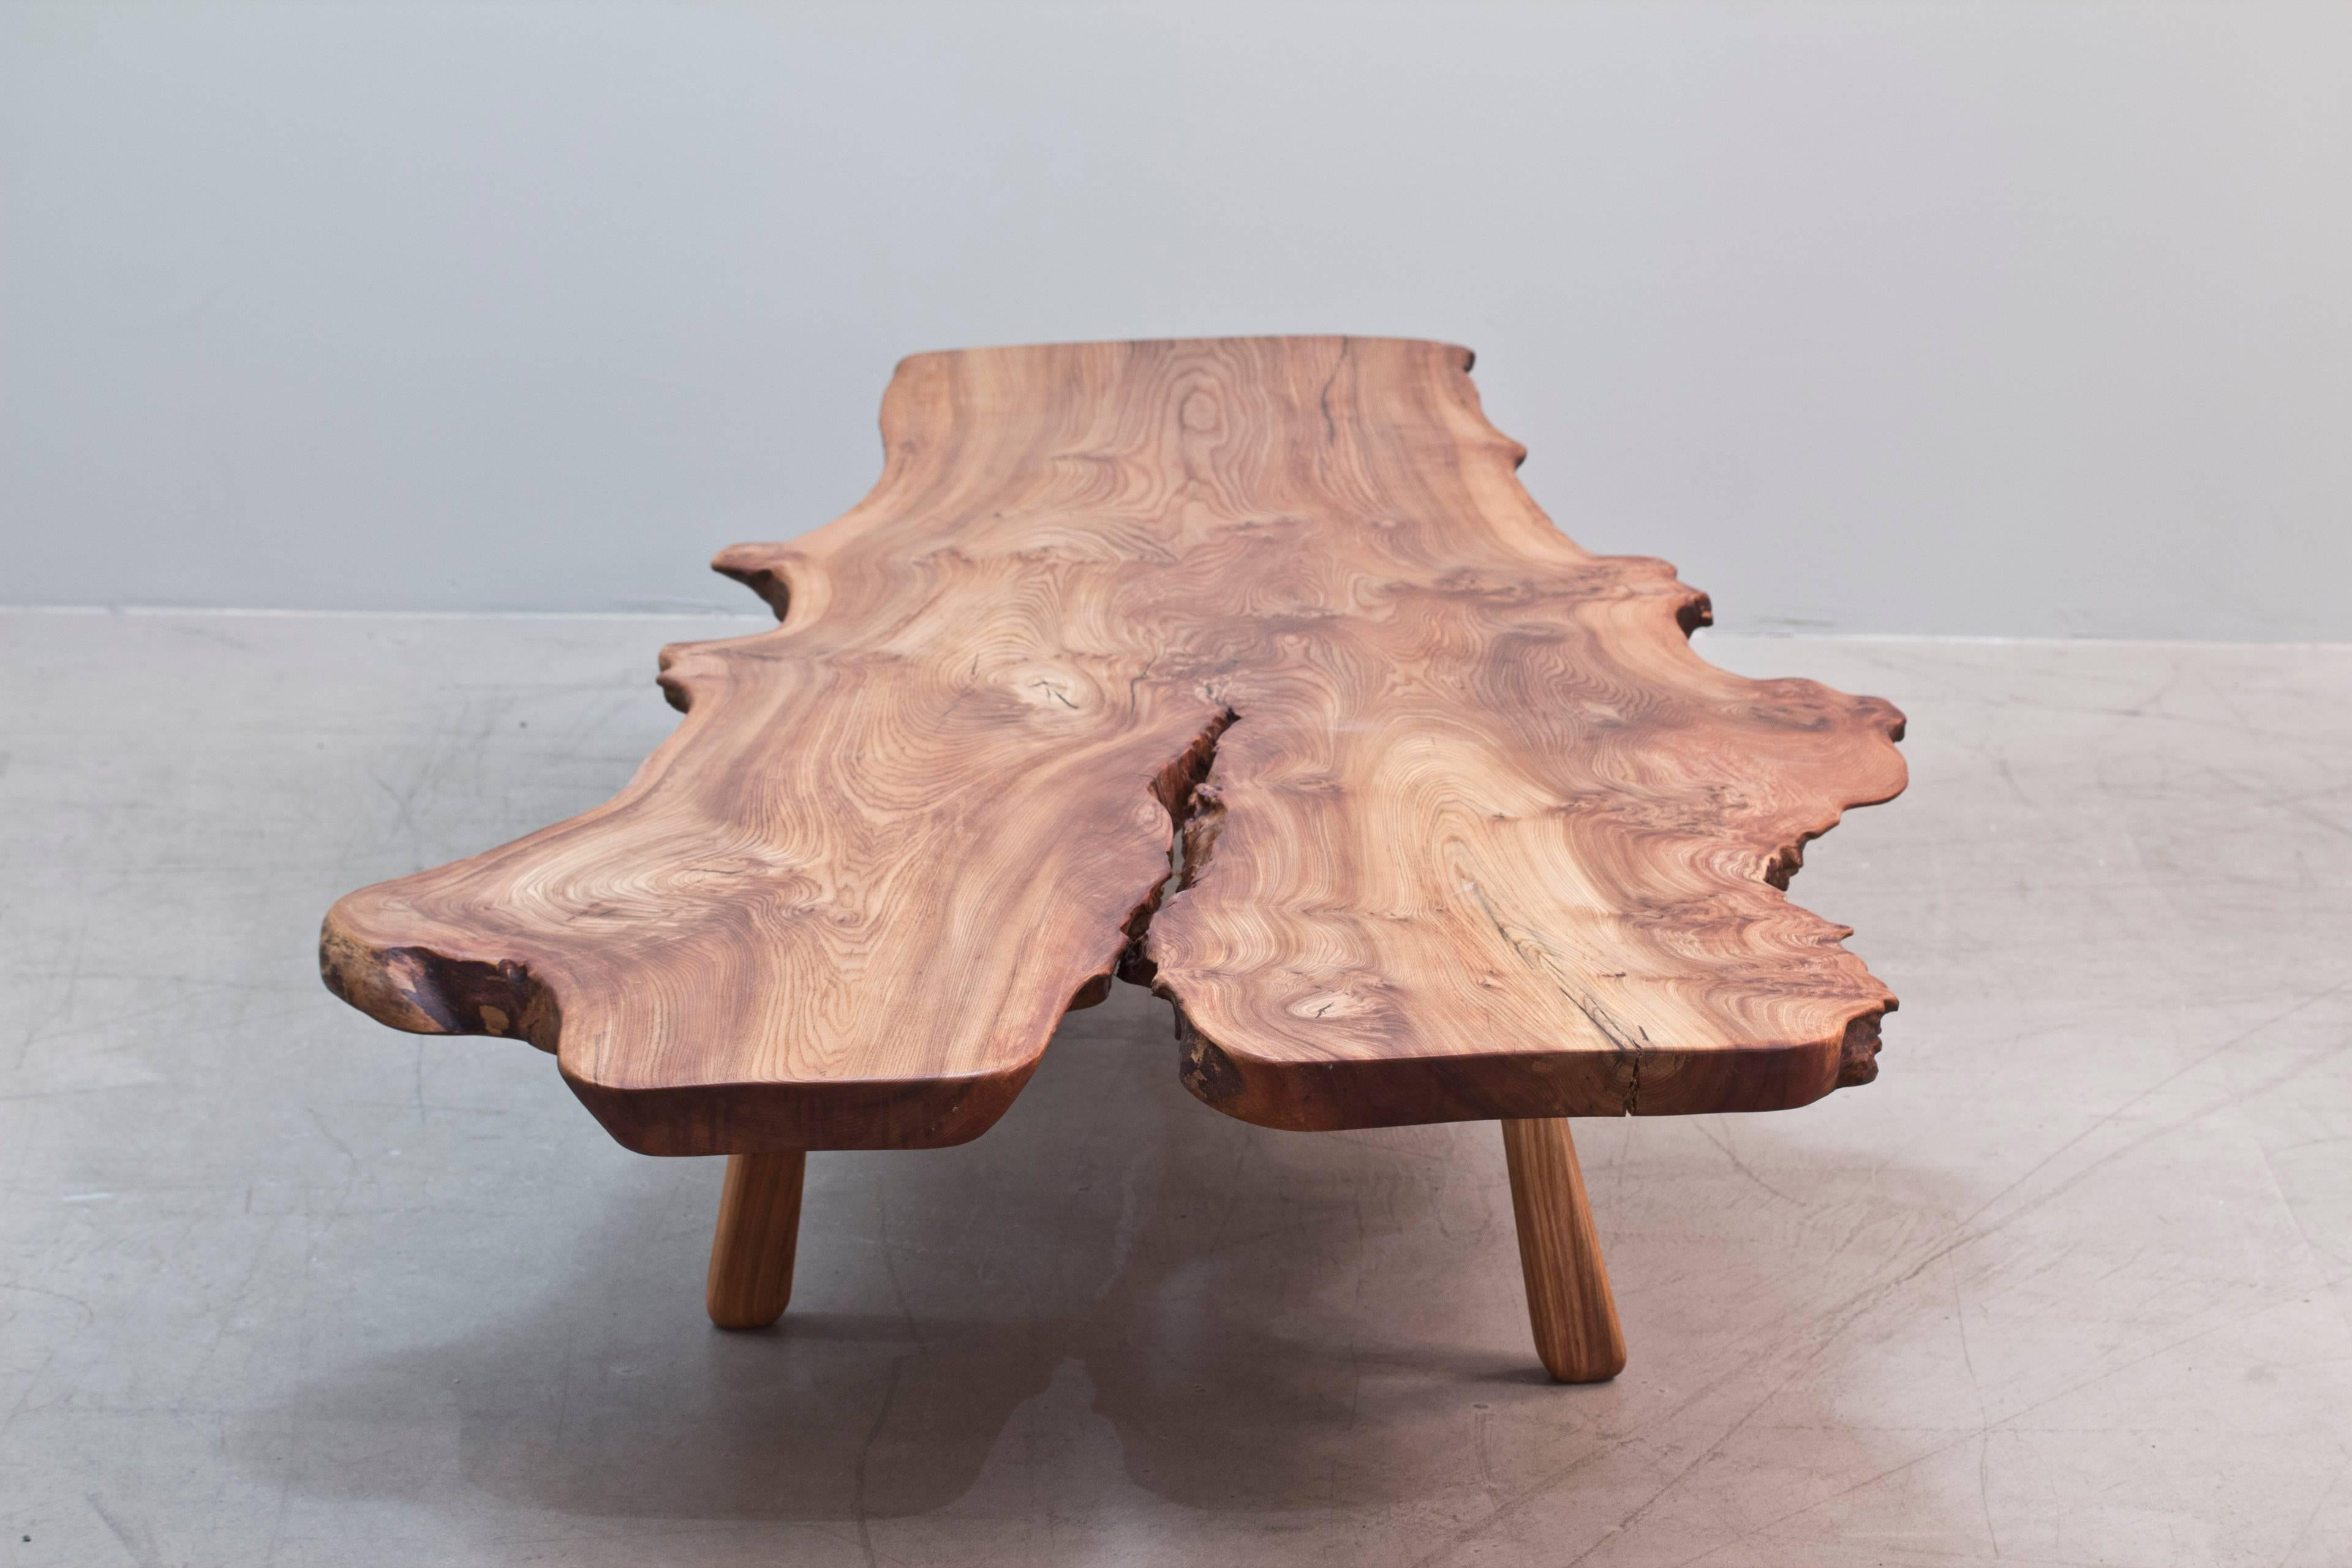 Elm tree root sofa table from Sweden. Beautiful natural finish with a organic shape makes this table one of a kind.